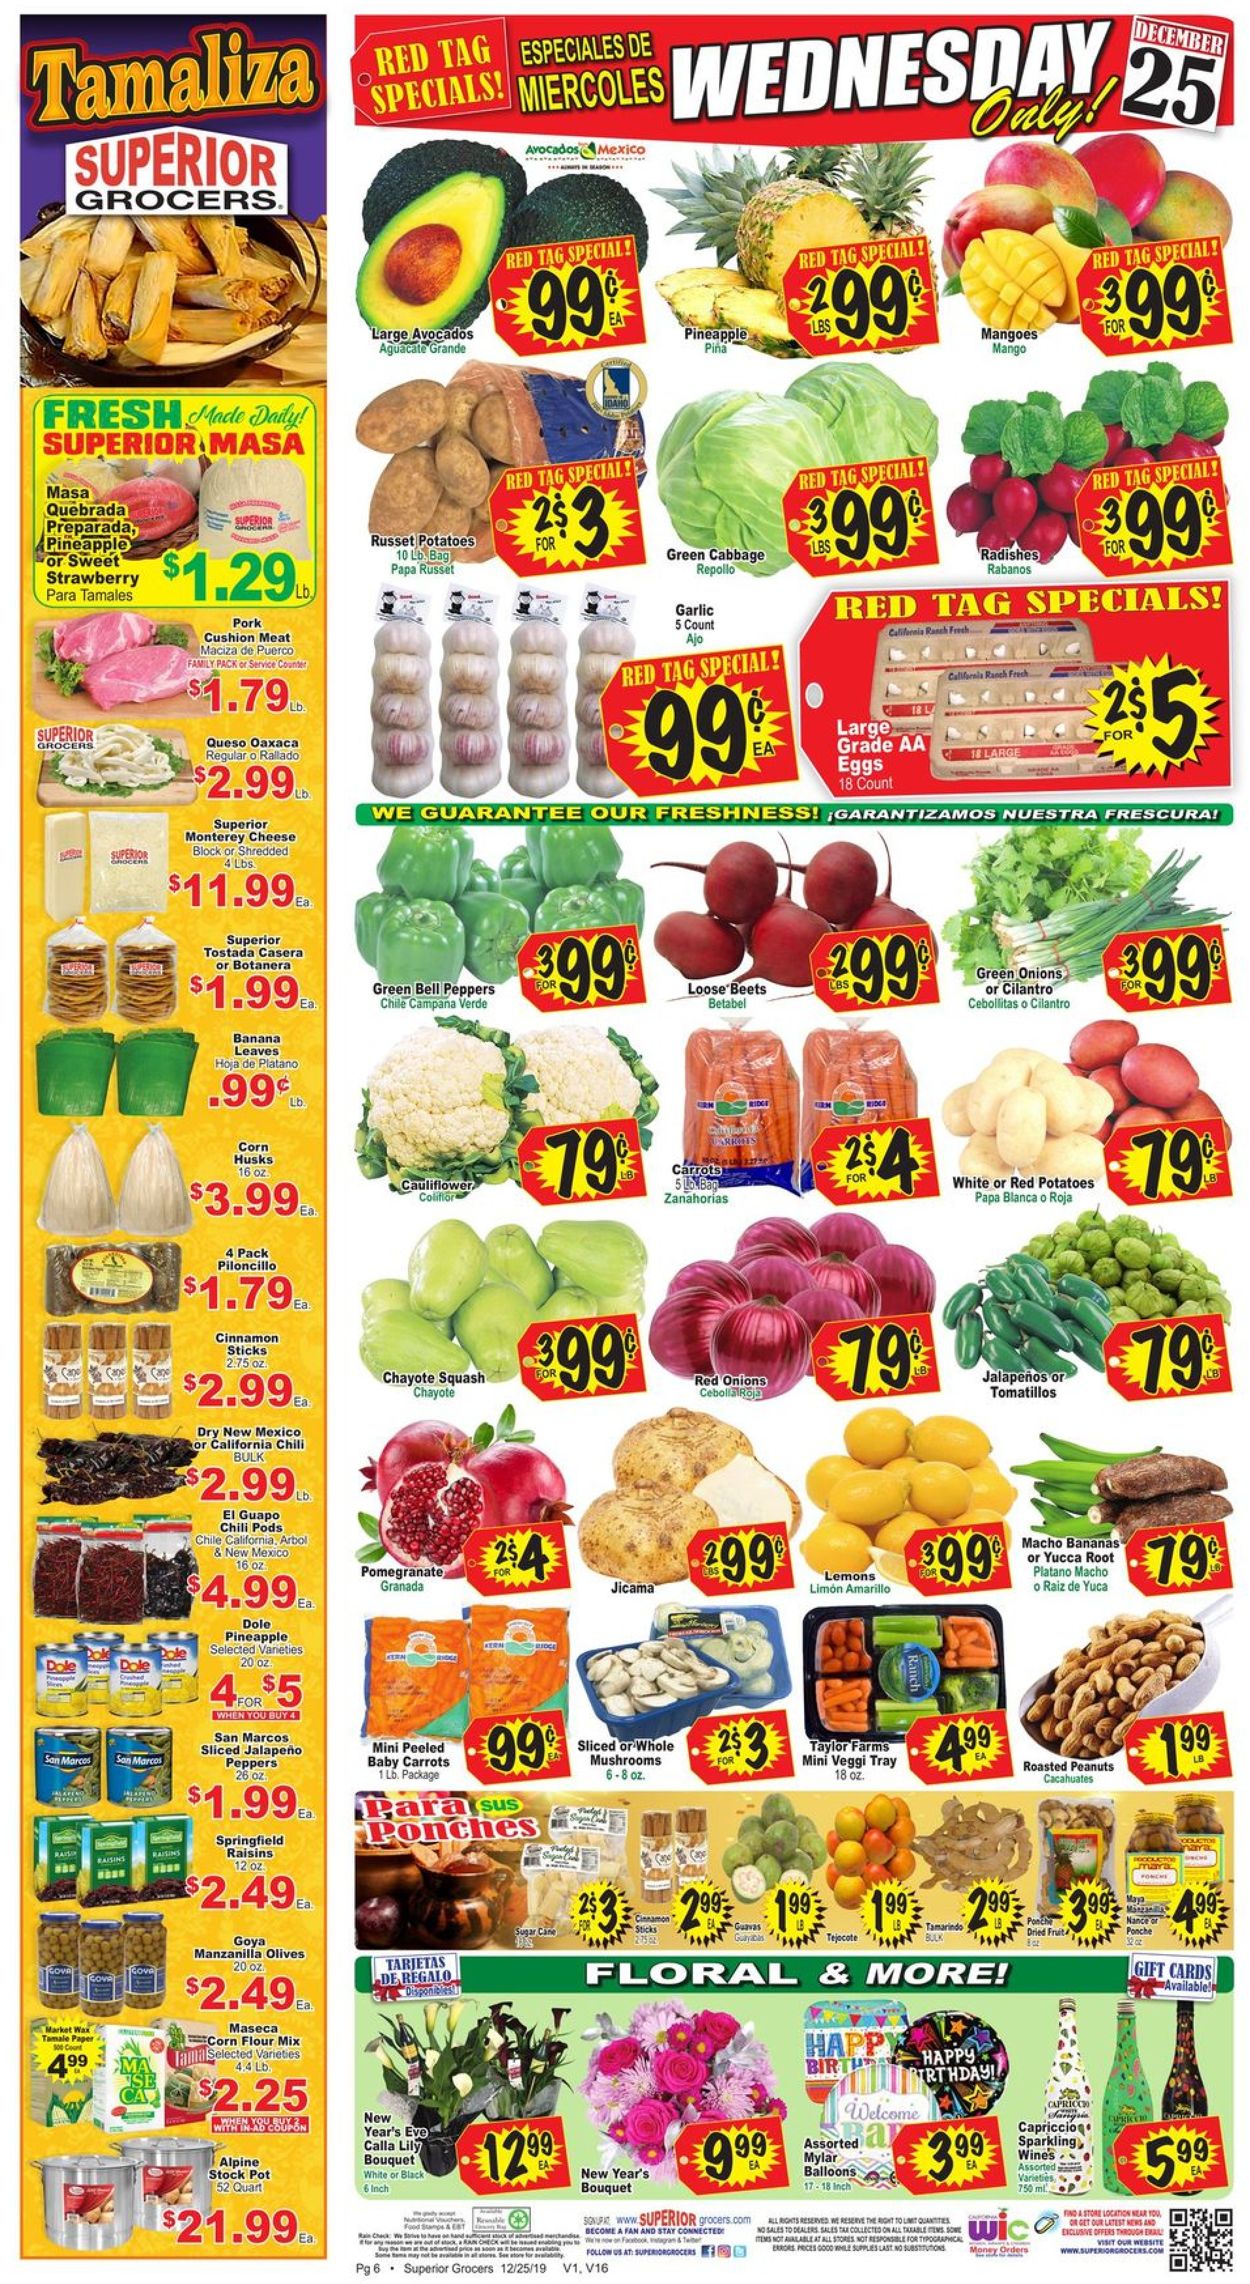 Superior Grocers - New Year's Ad 2019/2020 Weekly Ad Circular - valid 12/25-01/01/2020 (Page 6)